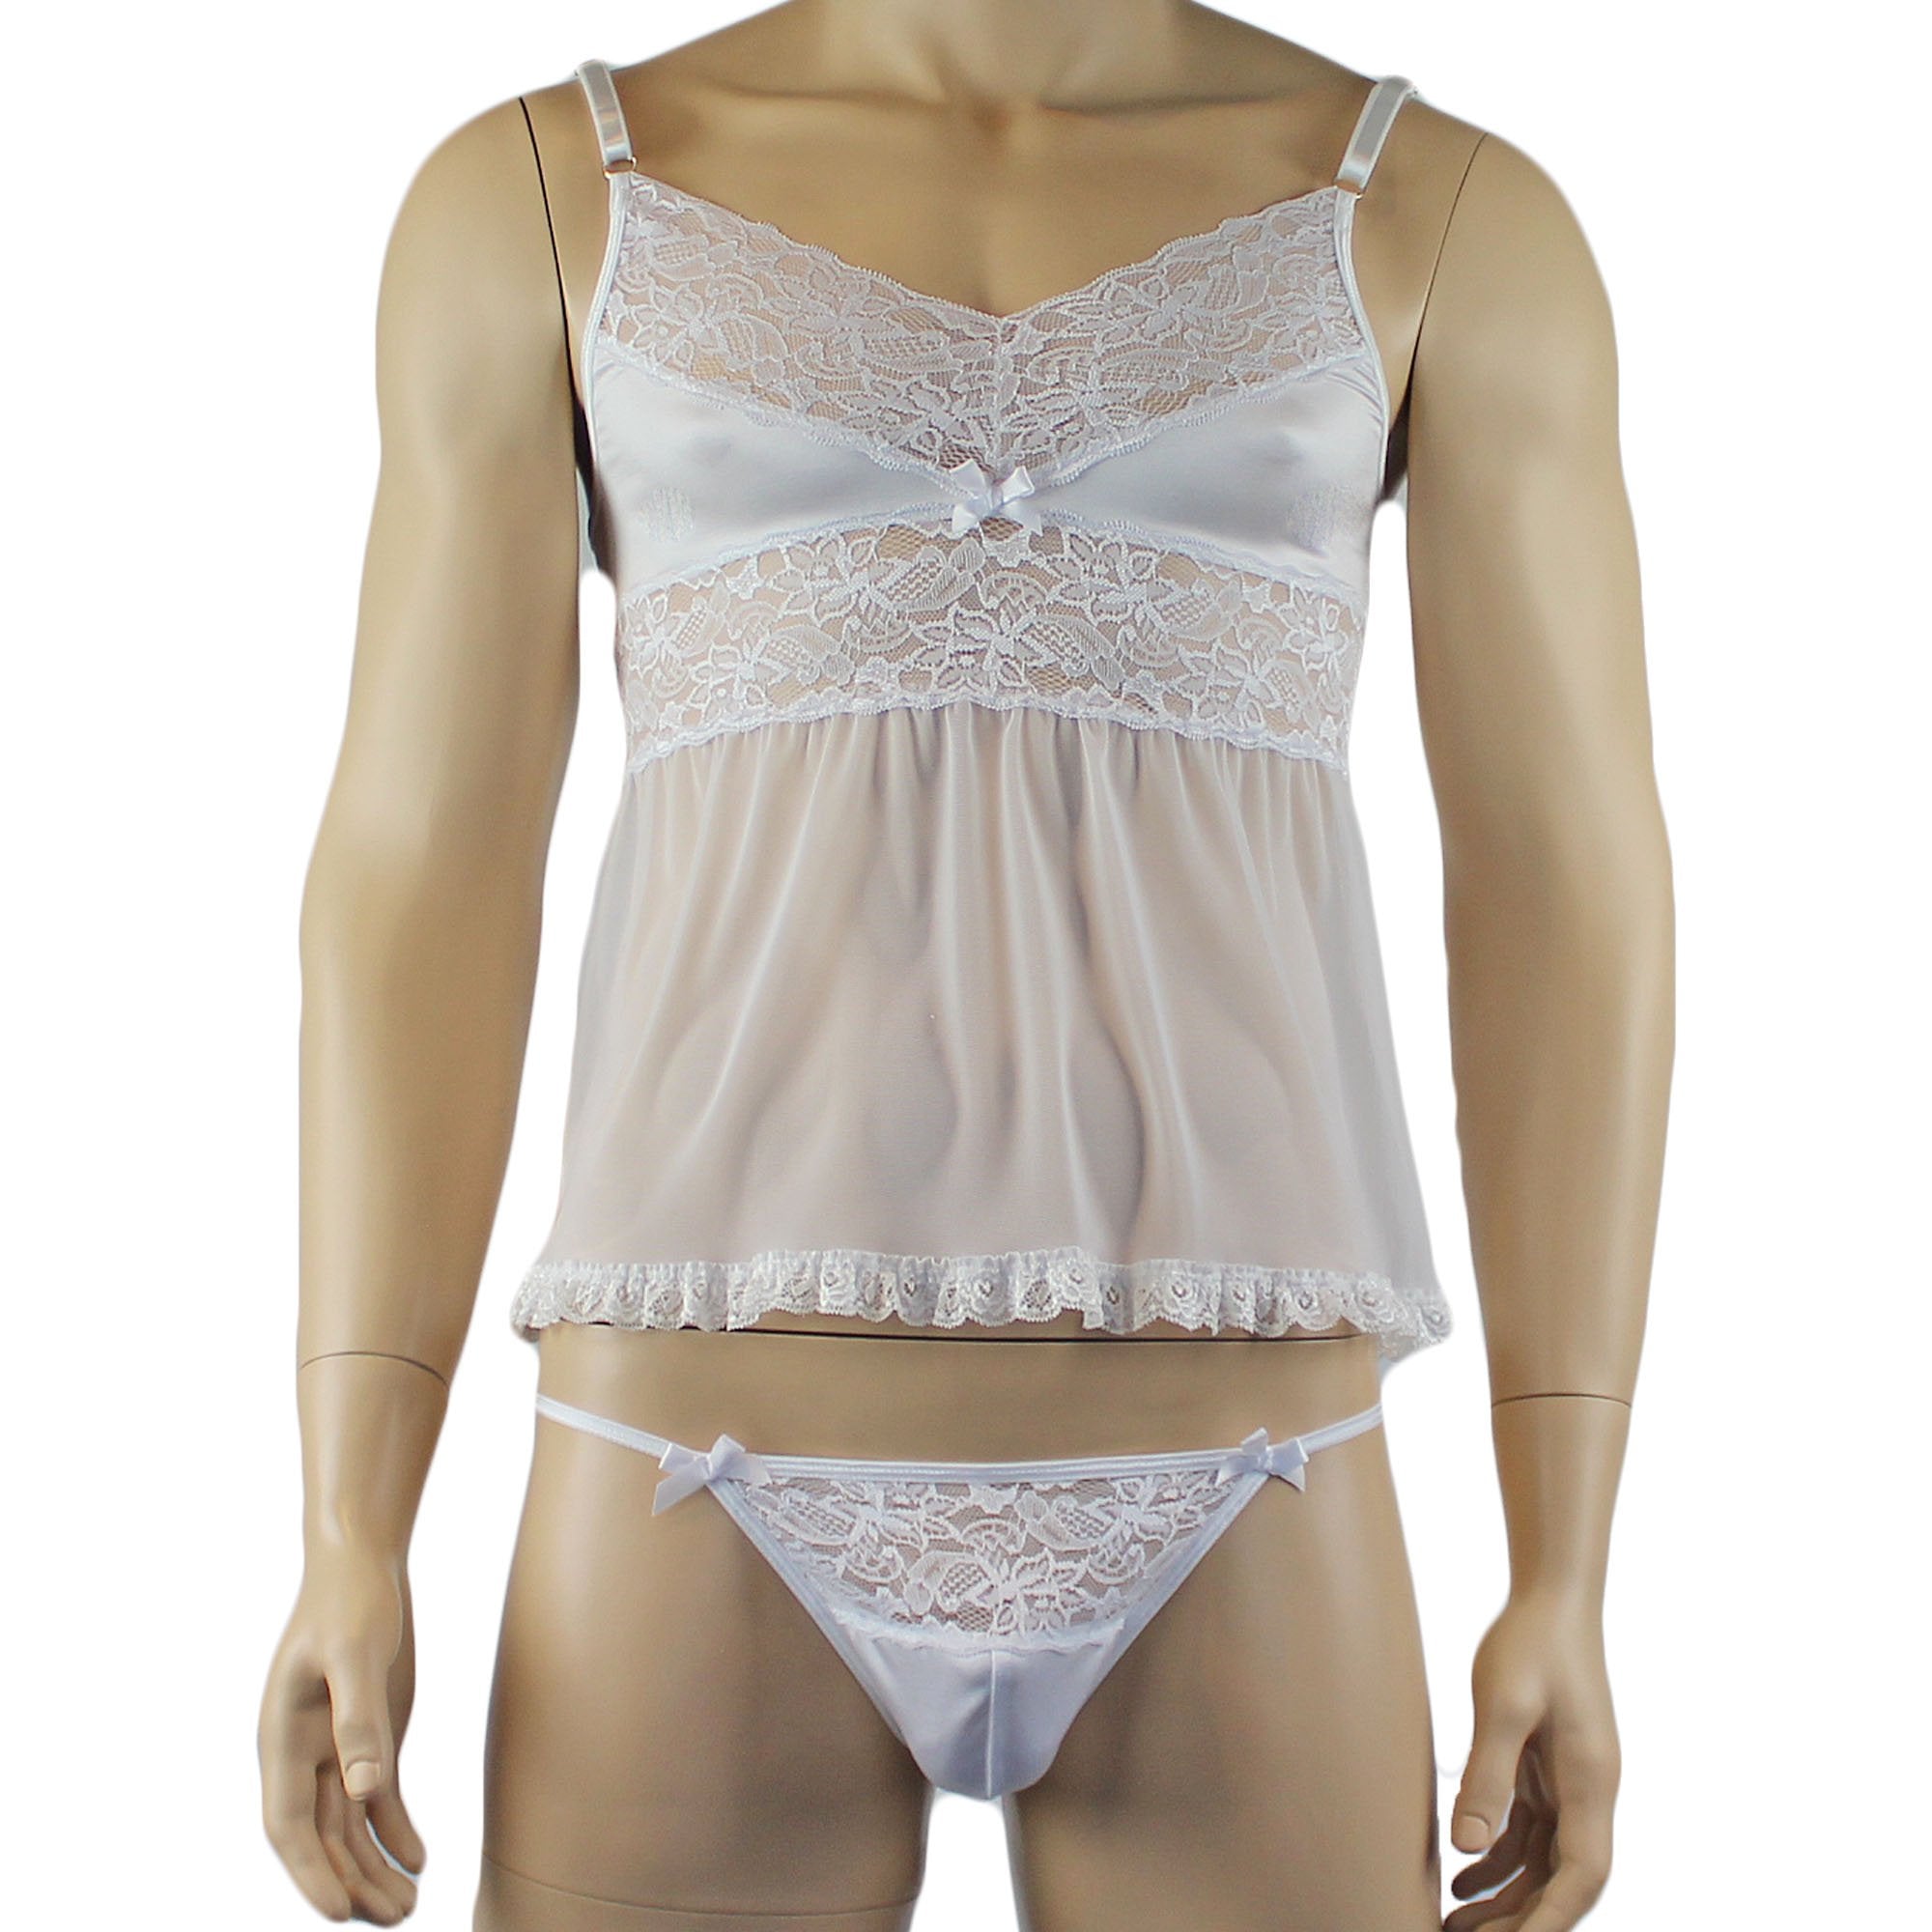 Male Romance Stretch Spandex Mini Babydoll Camisole & G string for Lingerie Men White or Black